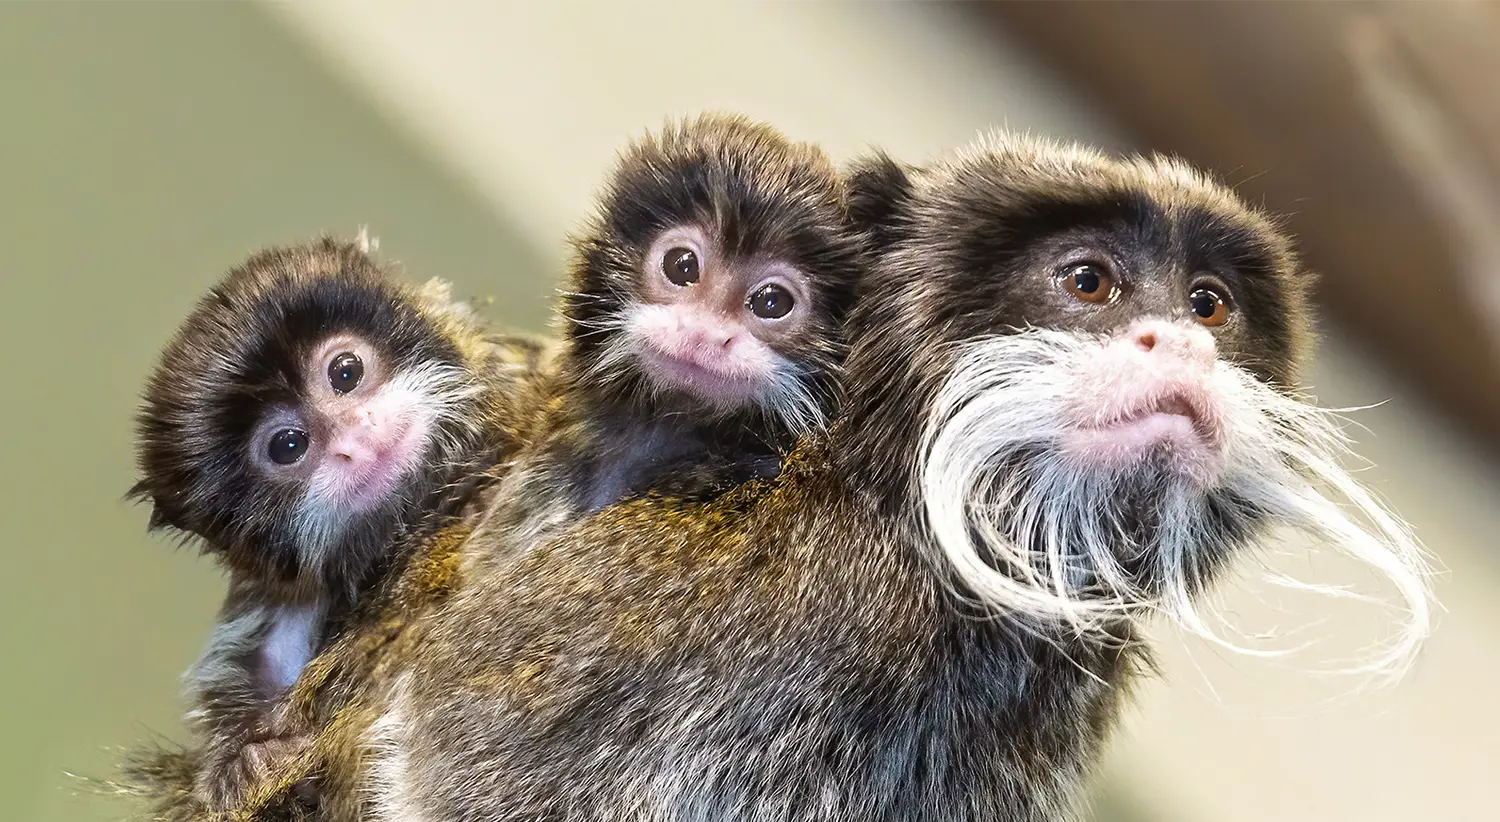 Two baby Emperor Tamarin monkeys ride on the back of an adult monkey.